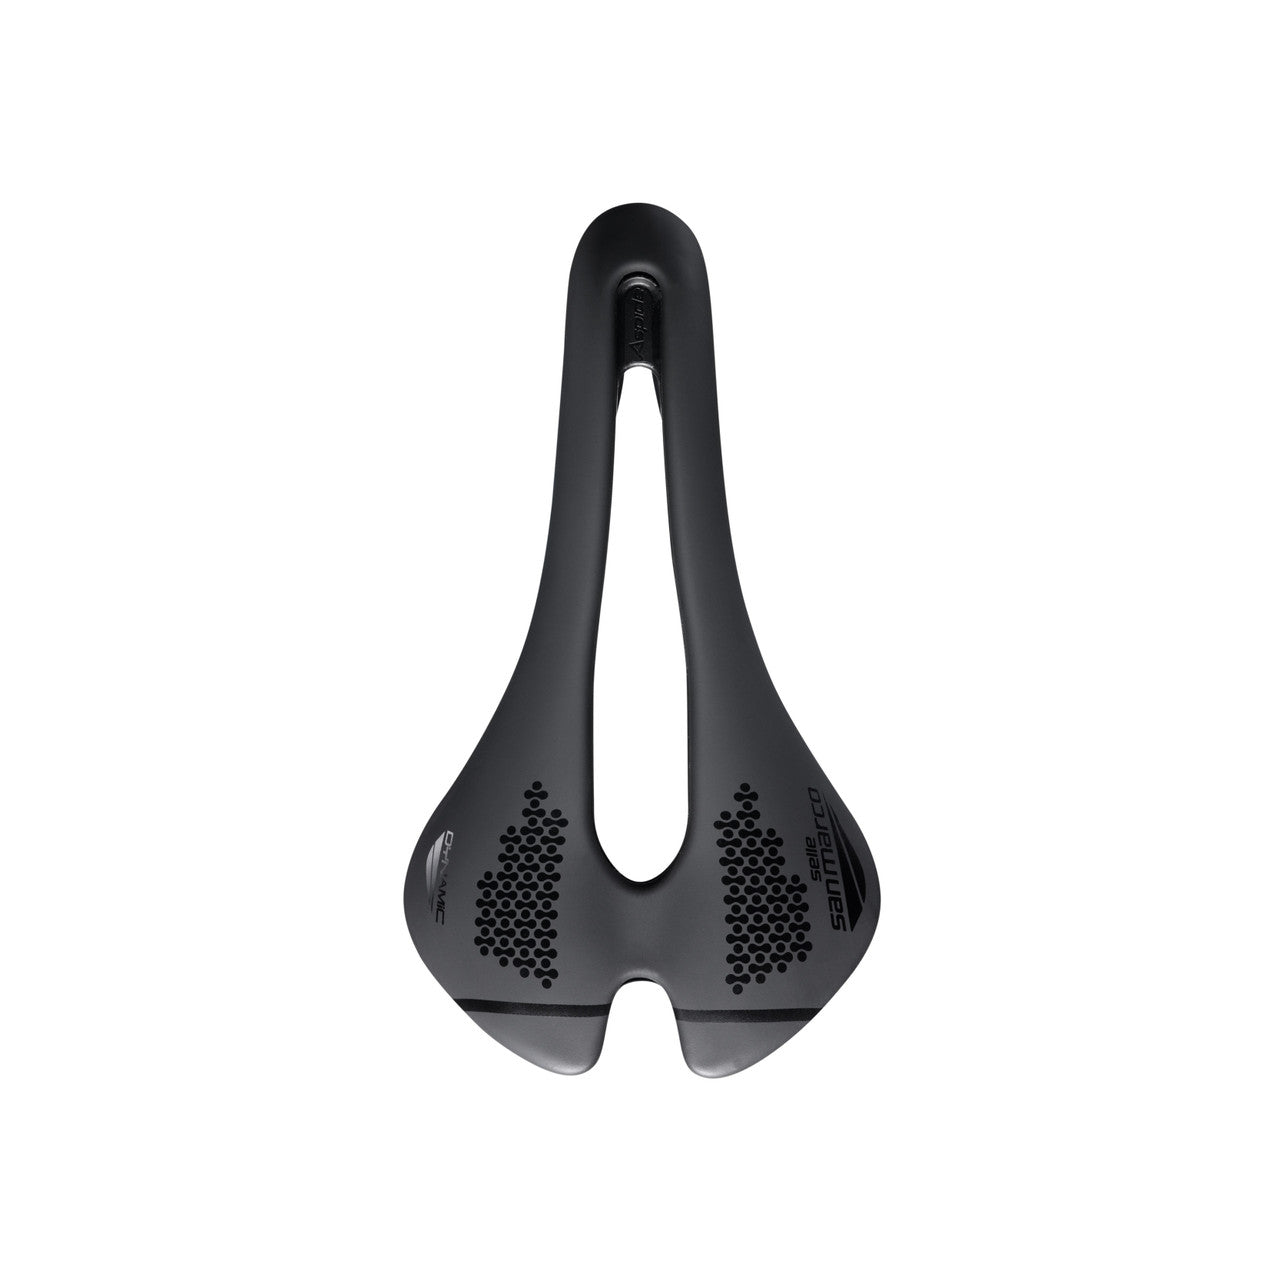 San Marco Aspide Short Open-Fit Dynamic Narrow S3 saddle